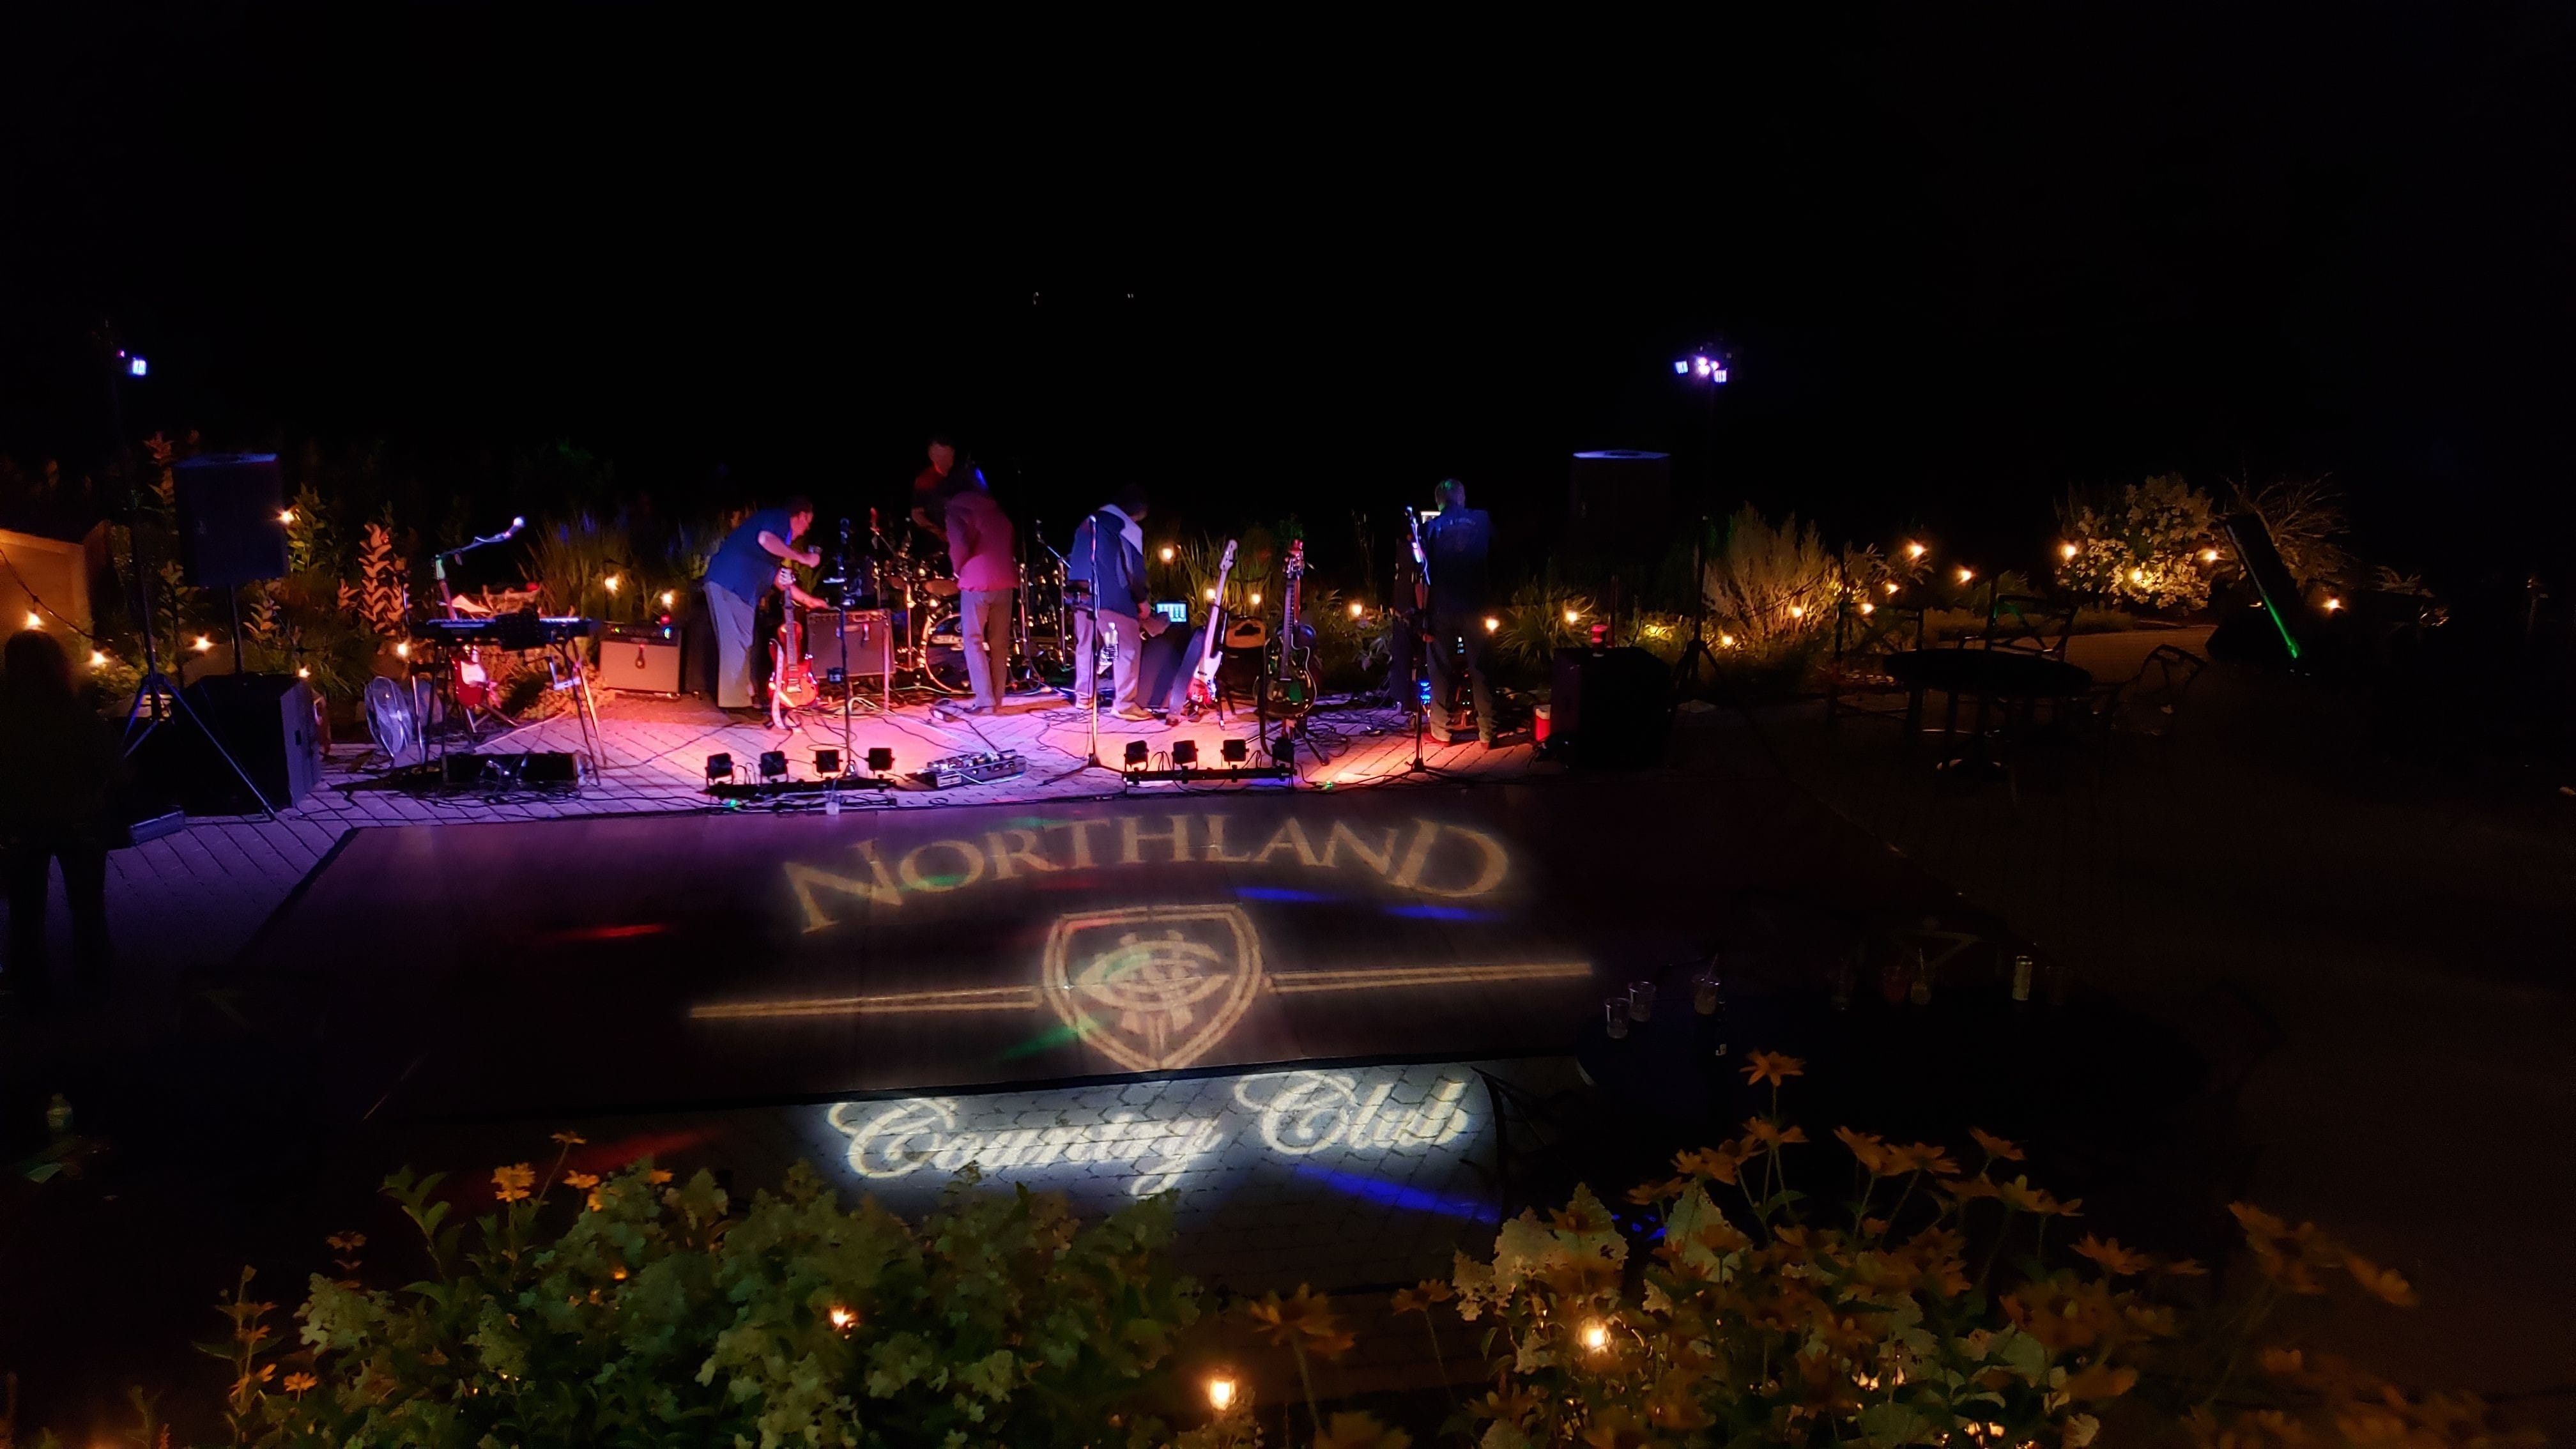 Northland Country Club logo on the dance floor with garden bistro lighting up the area.